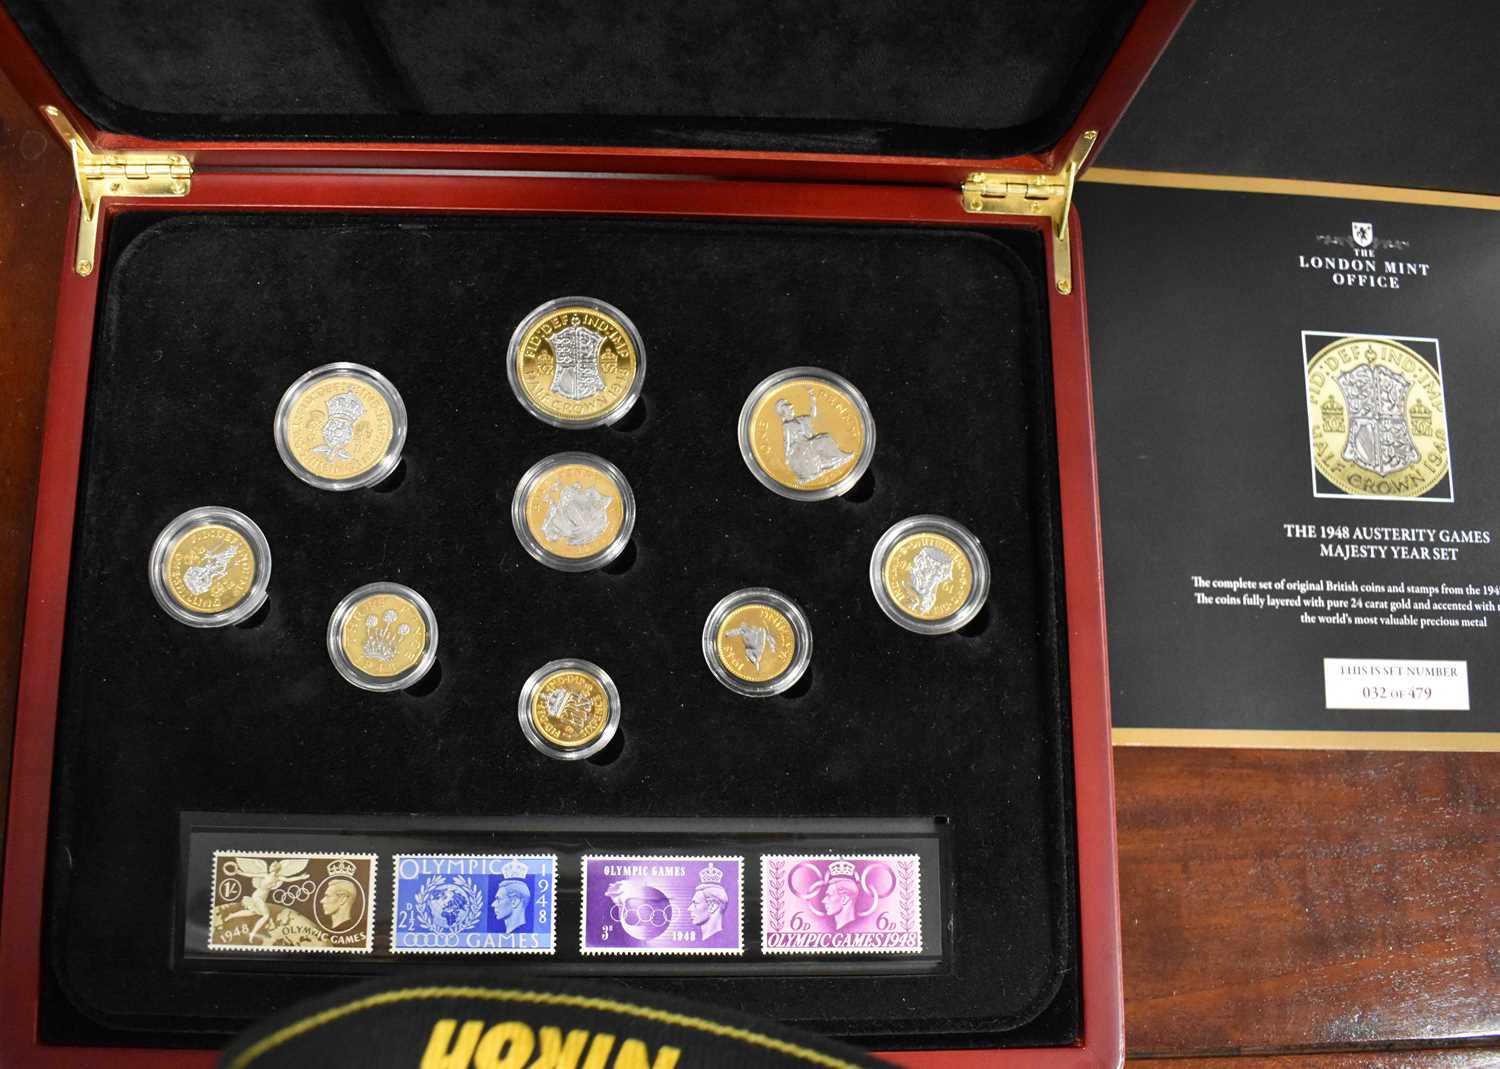 A London Mint Office 1948 Austerity Games Majesty Set, a complete set of original British coins - Image 2 of 4